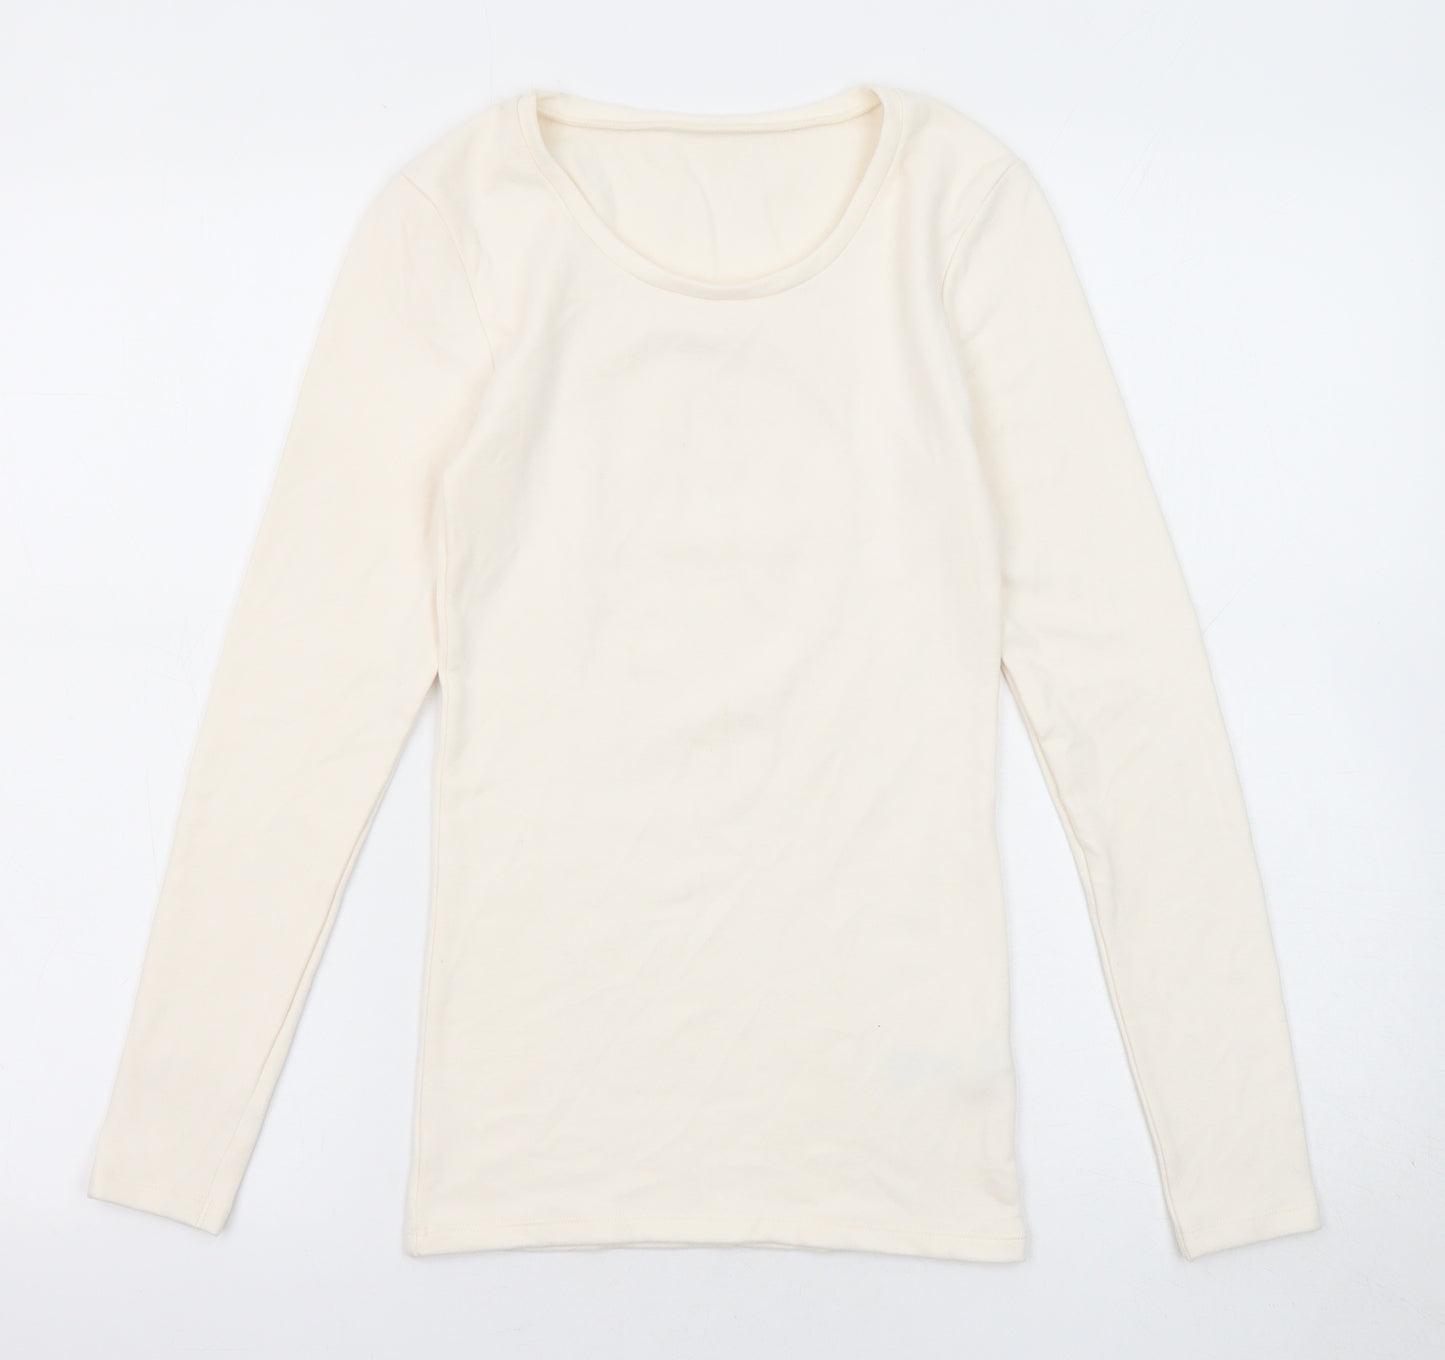 Marks and Spencer Womens Ivory Acrylic Basic T-Shirt Size 8 Scoop Neck - Thermal